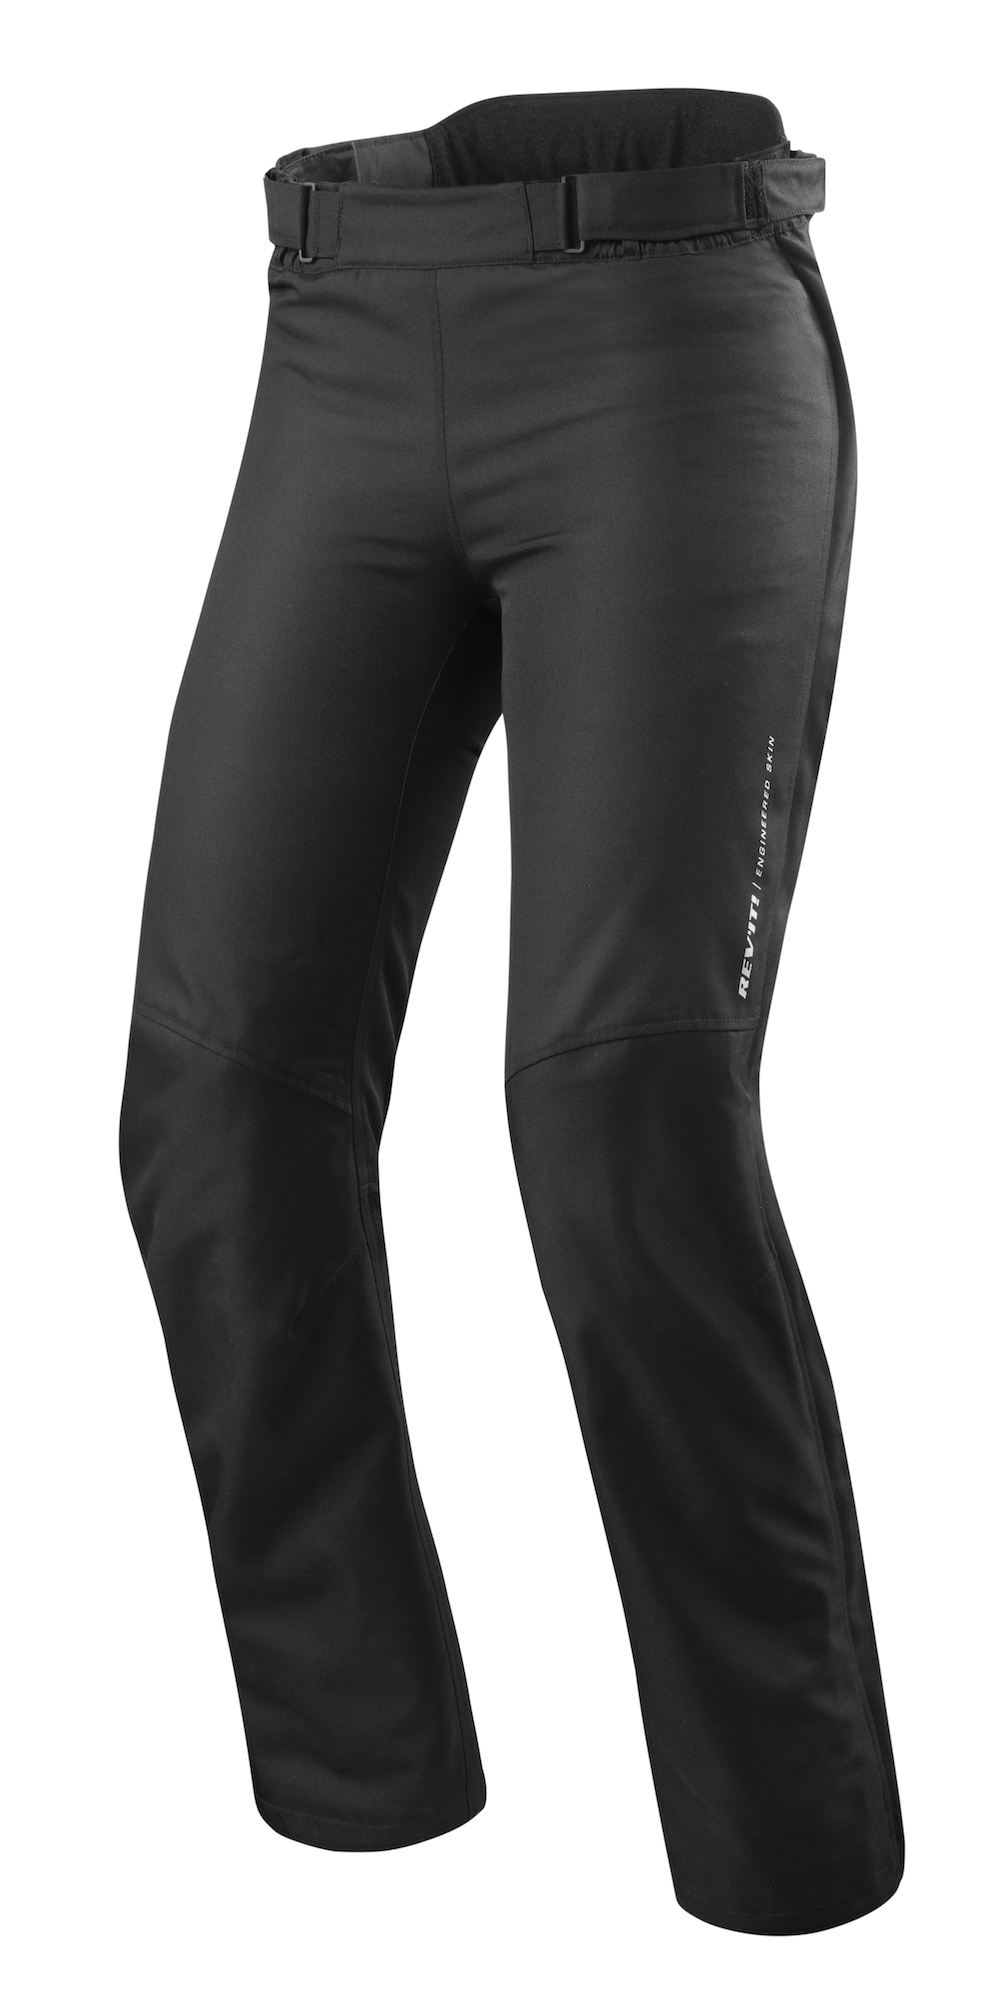 Ignition 3 Ladies motorcycle pants